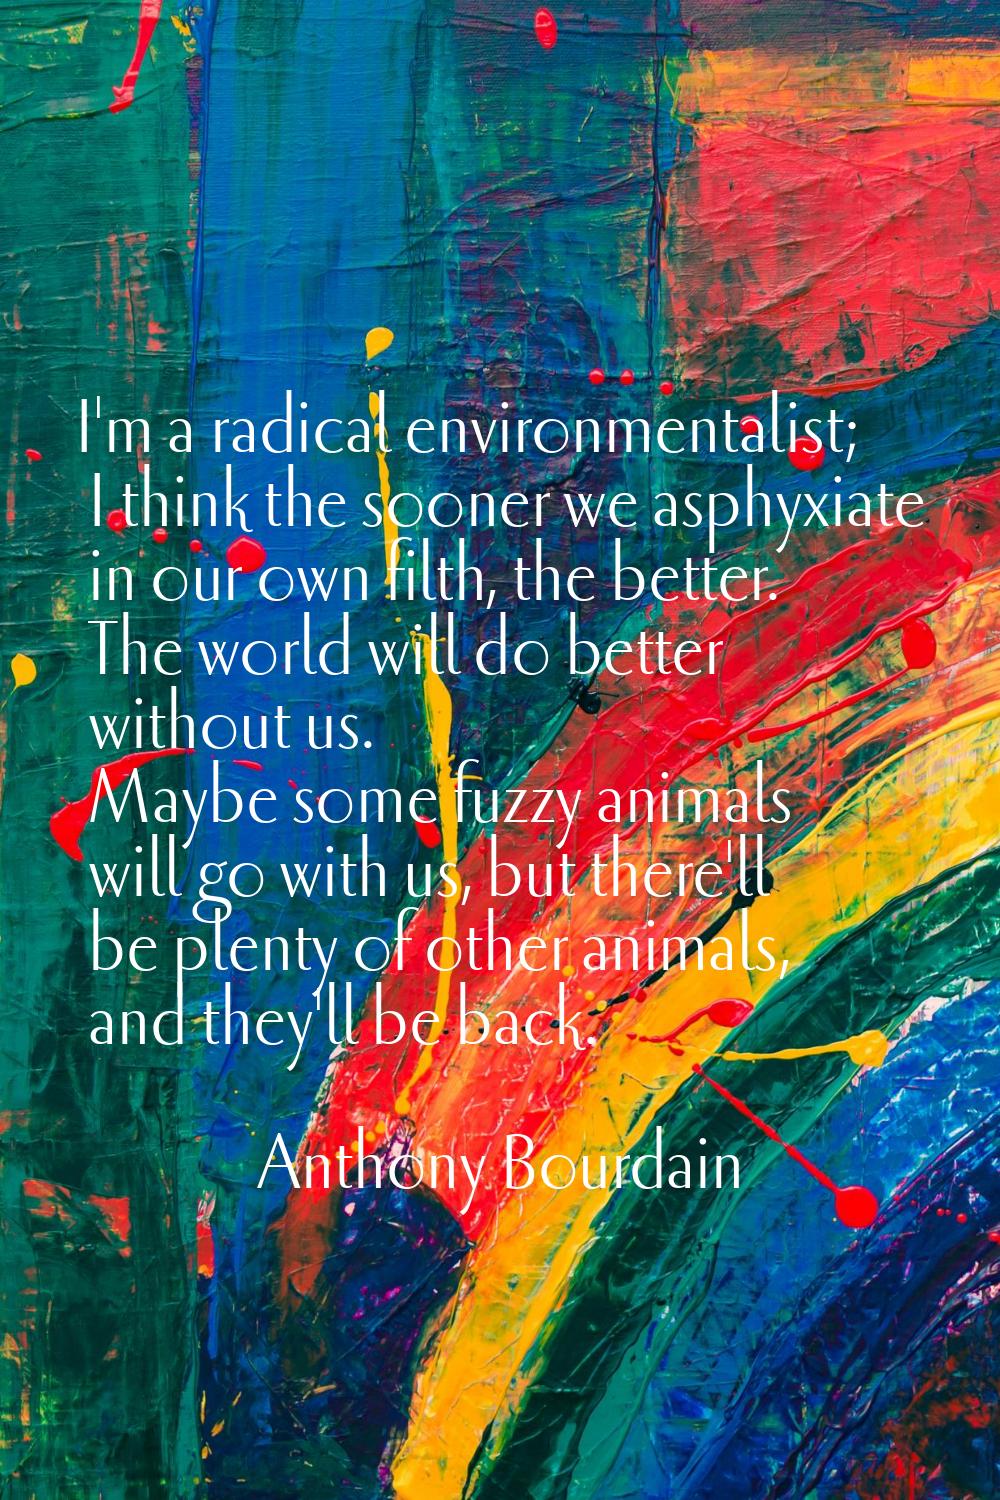 I'm a radical environmentalist; I think the sooner we asphyxiate in our own filth, the better. The 